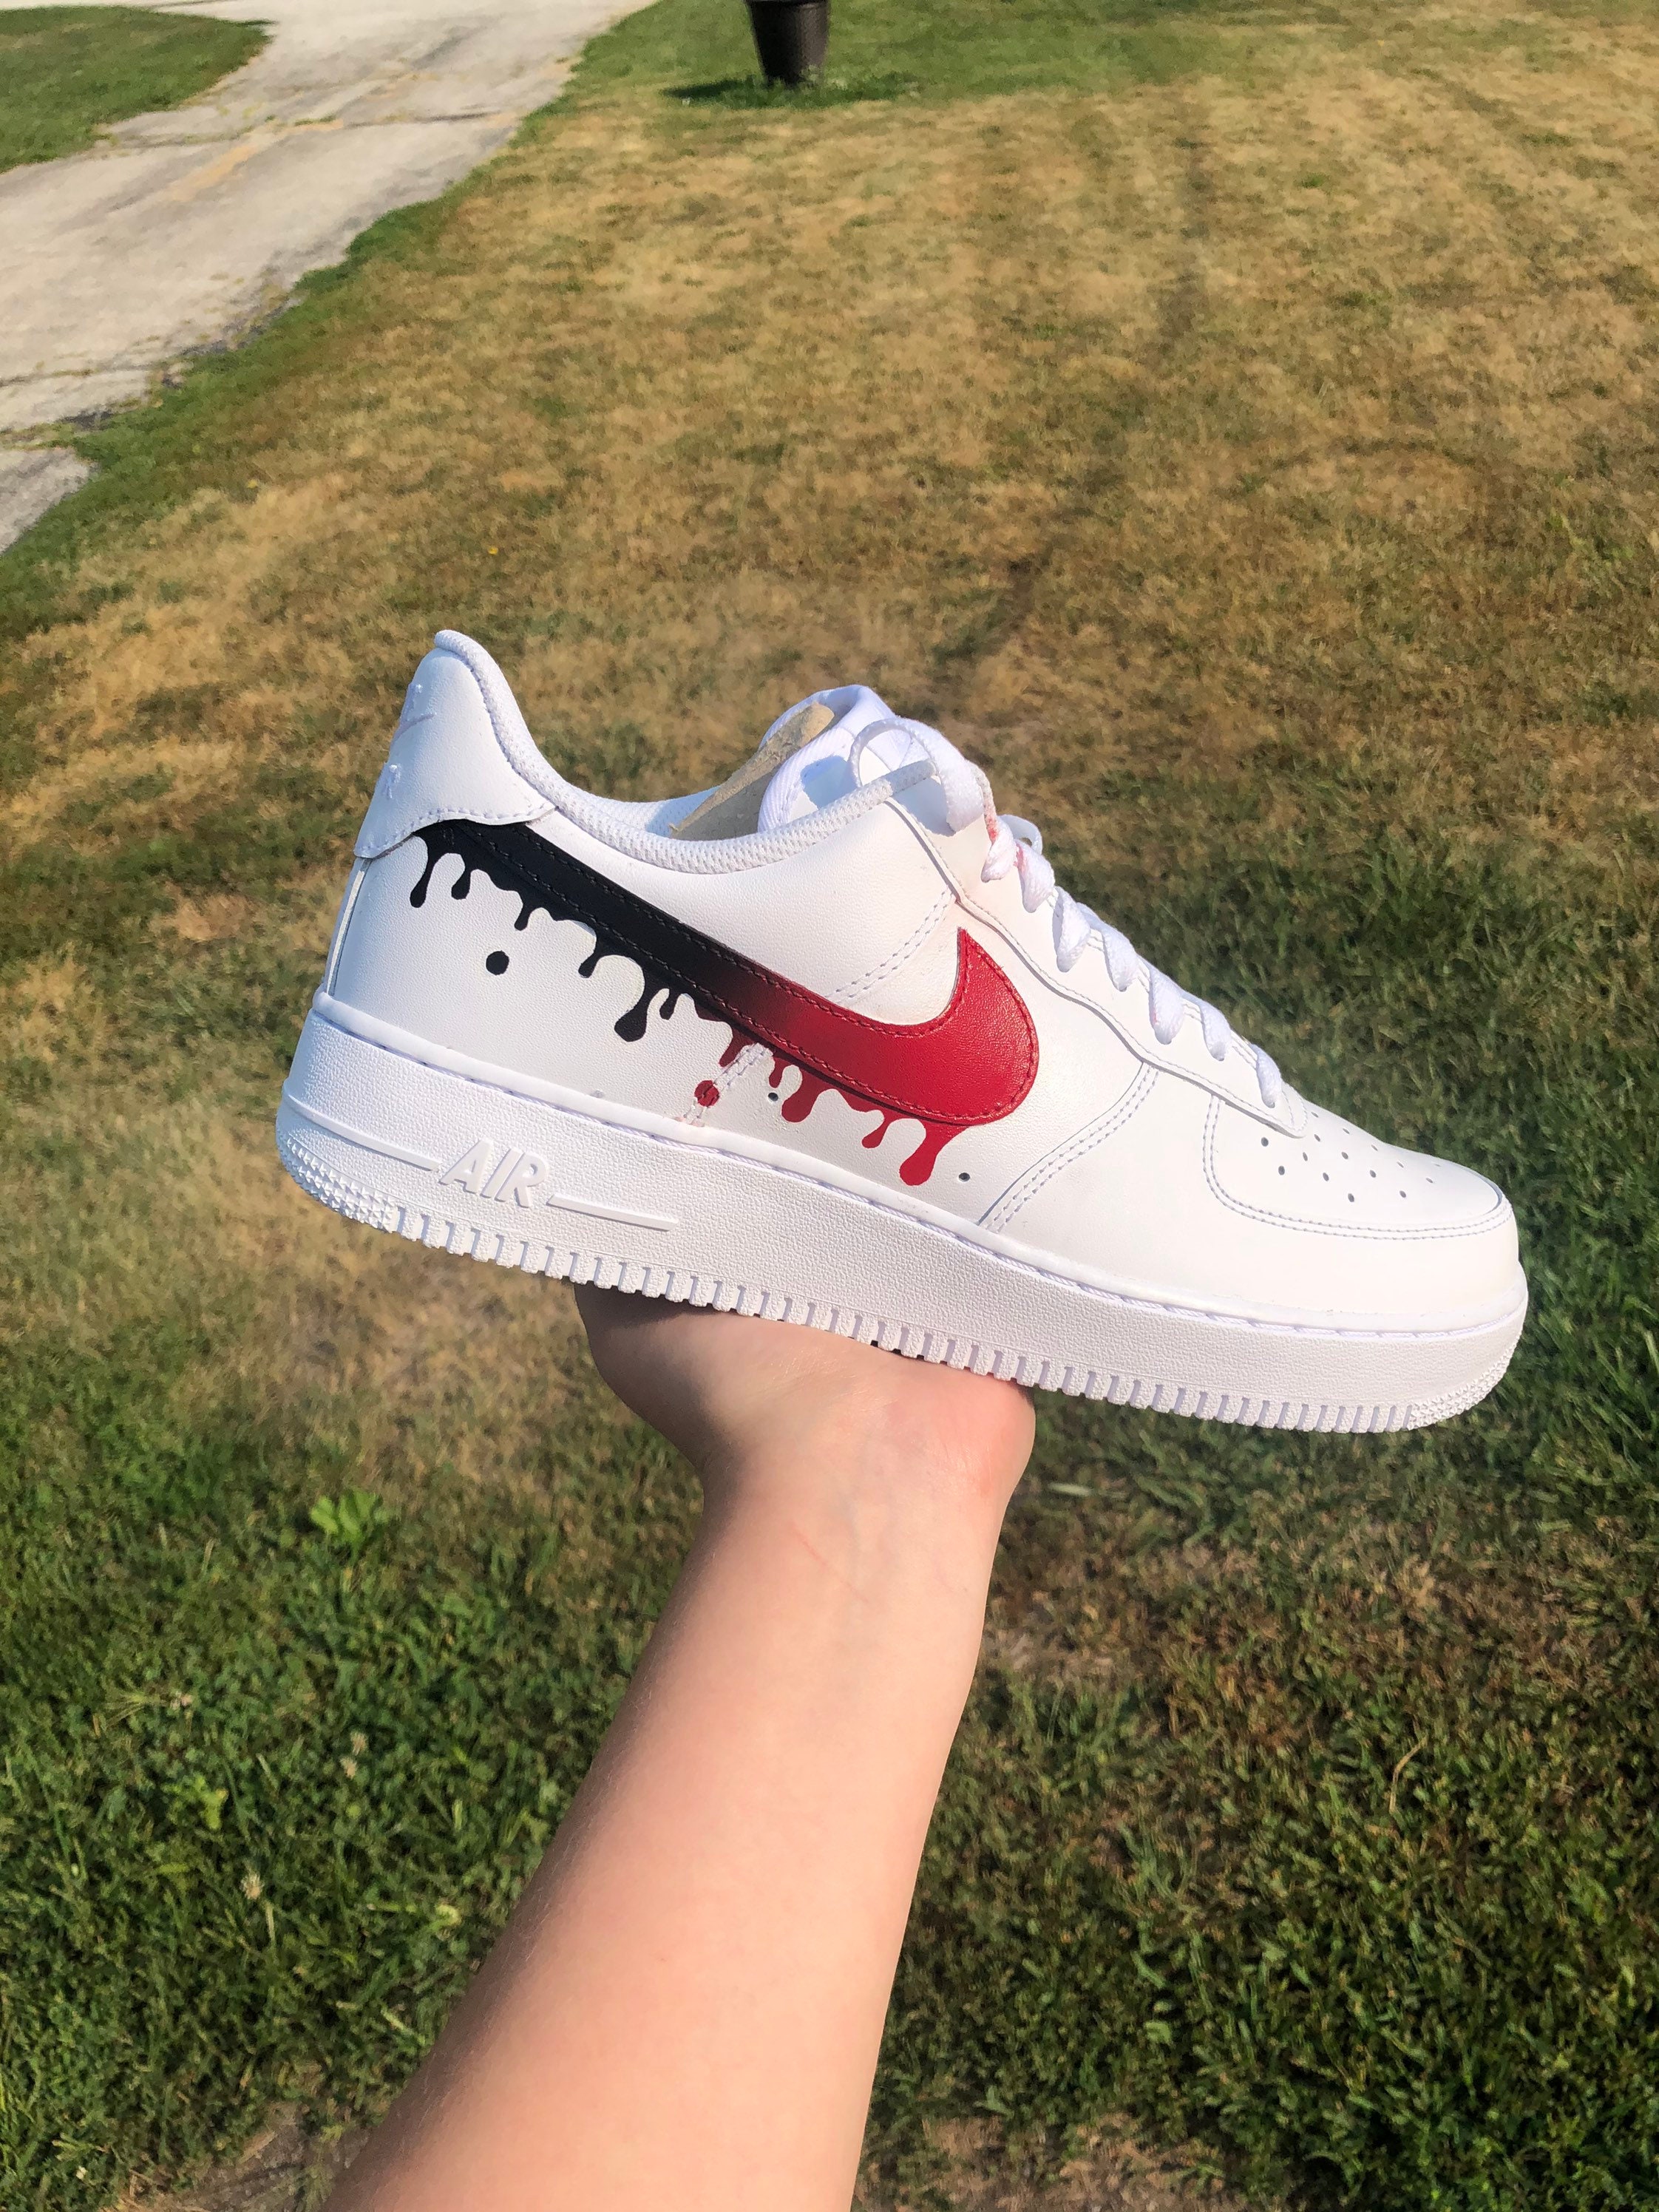 Create Your Own Drip Air Force 1 | Etsy